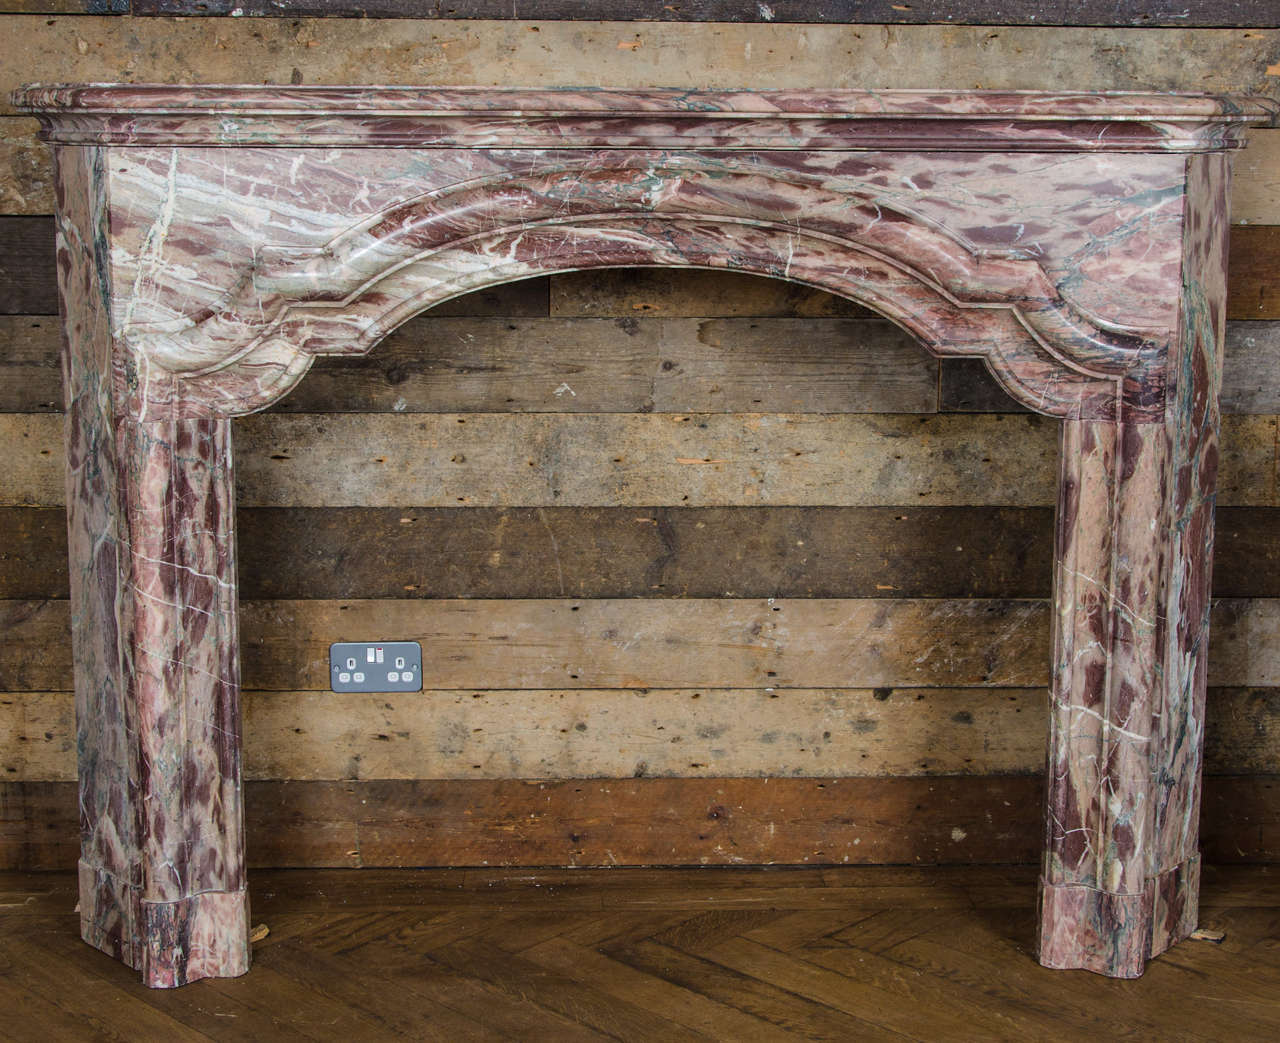 A beautiful antique fire surround in striking Sarancolin marble. This French style surround has a moulded shelf and shaped opening with angled jambs. This surround is made from a distinctive marble with pink and grey veining.